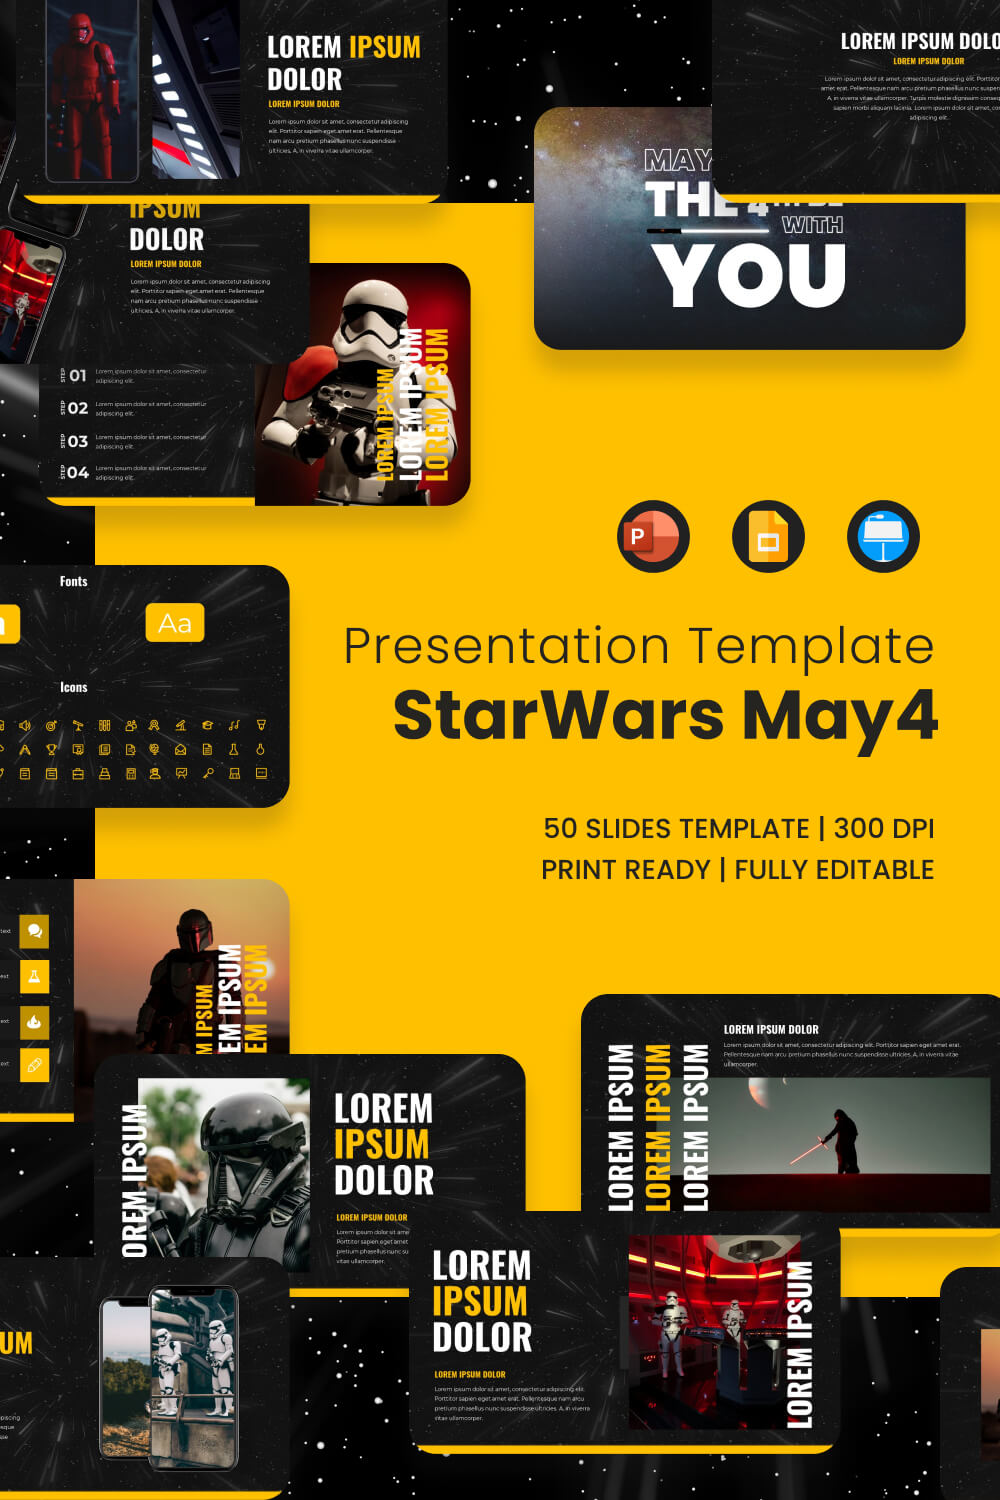 May4th Star Wars Presentation Template pinterest image.